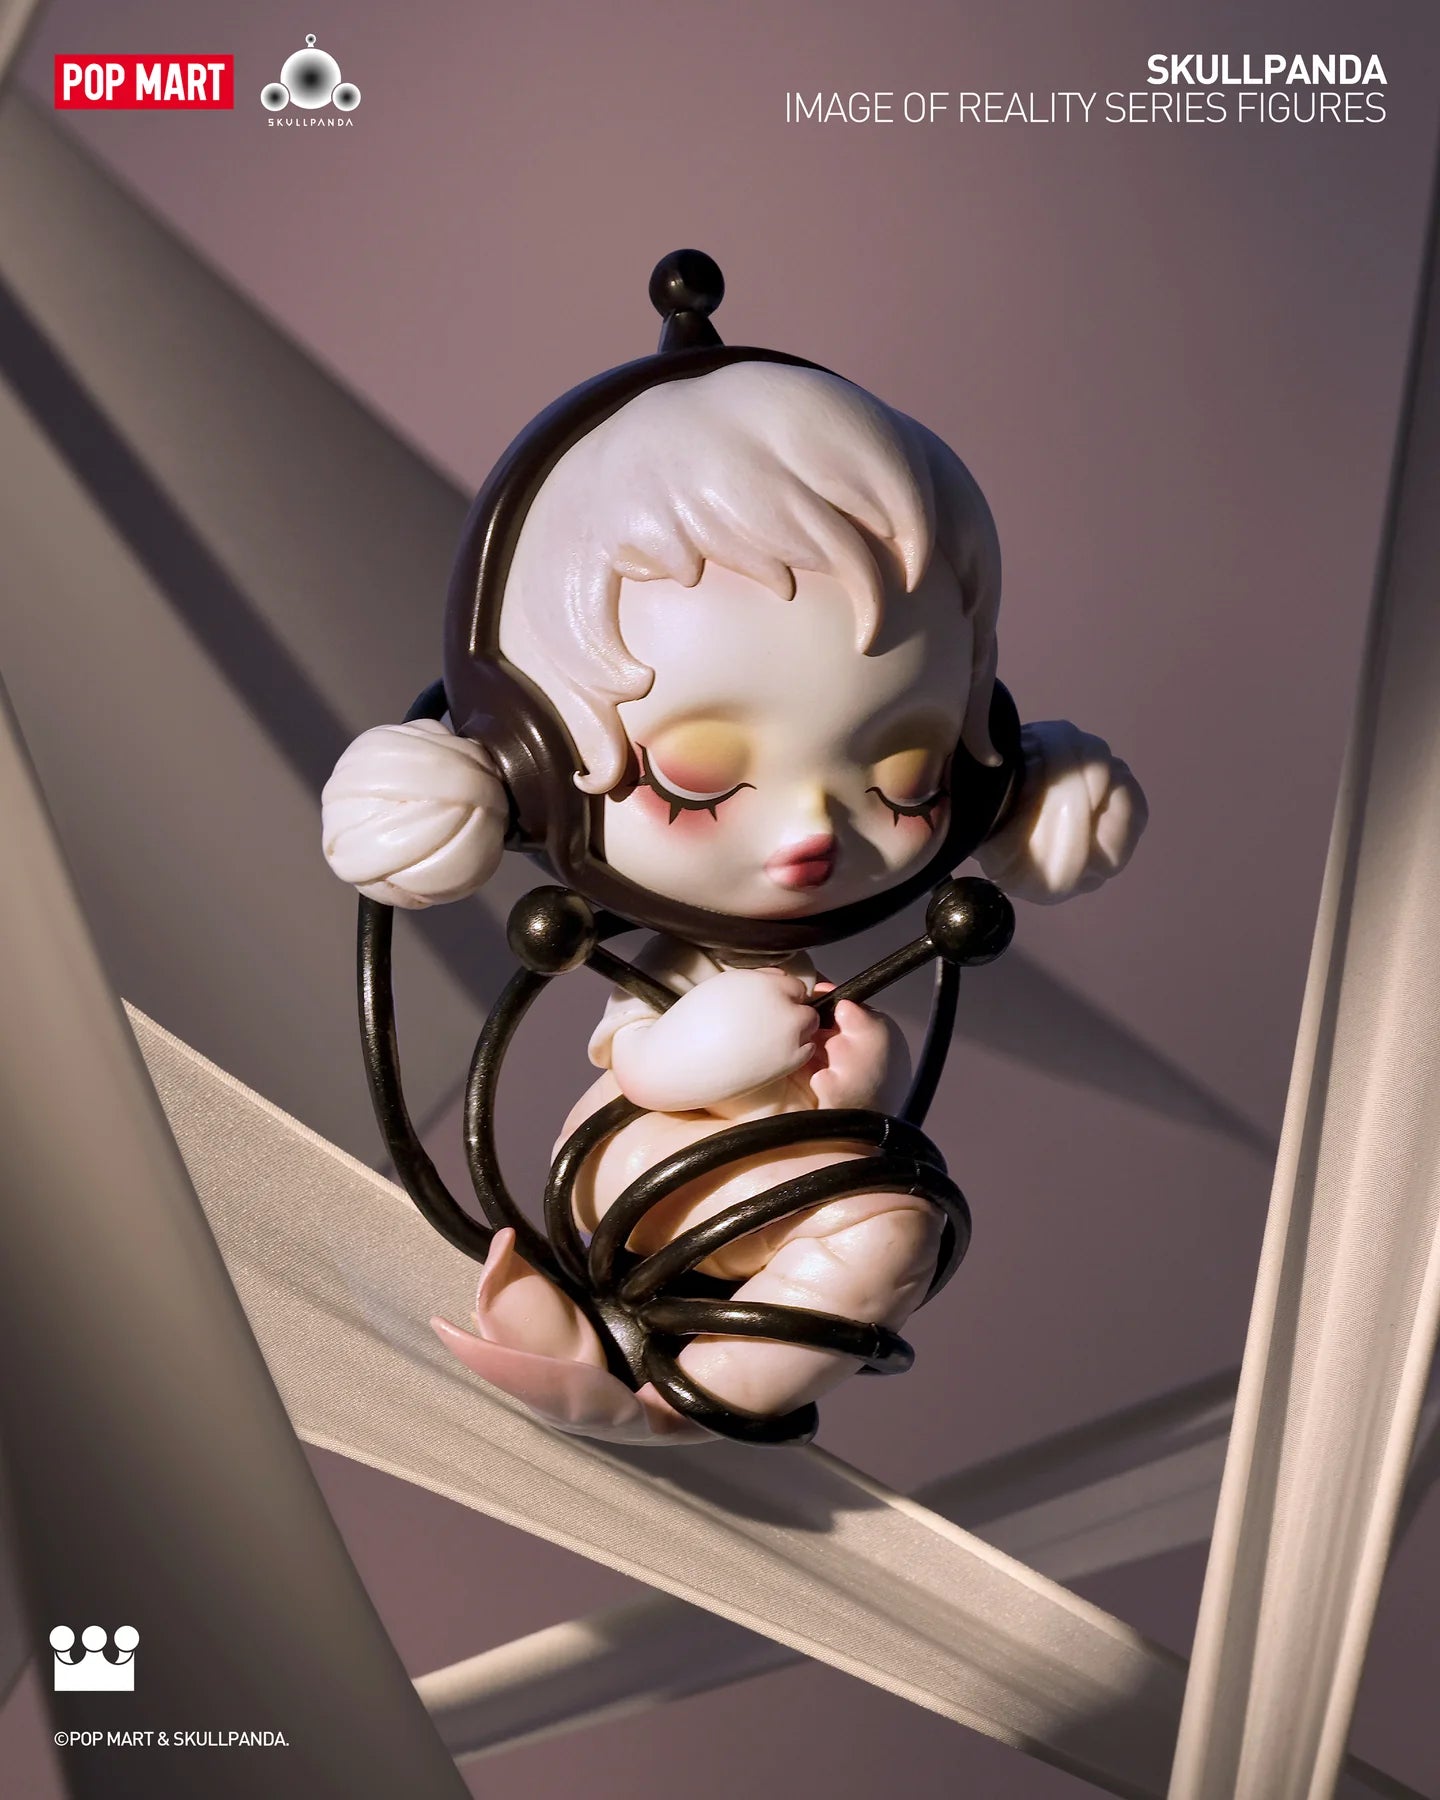 SKULLPANDA Image Of Reality Series Figures - Preorder: Baby figurine with headphones, swing, and more in blind box collection.